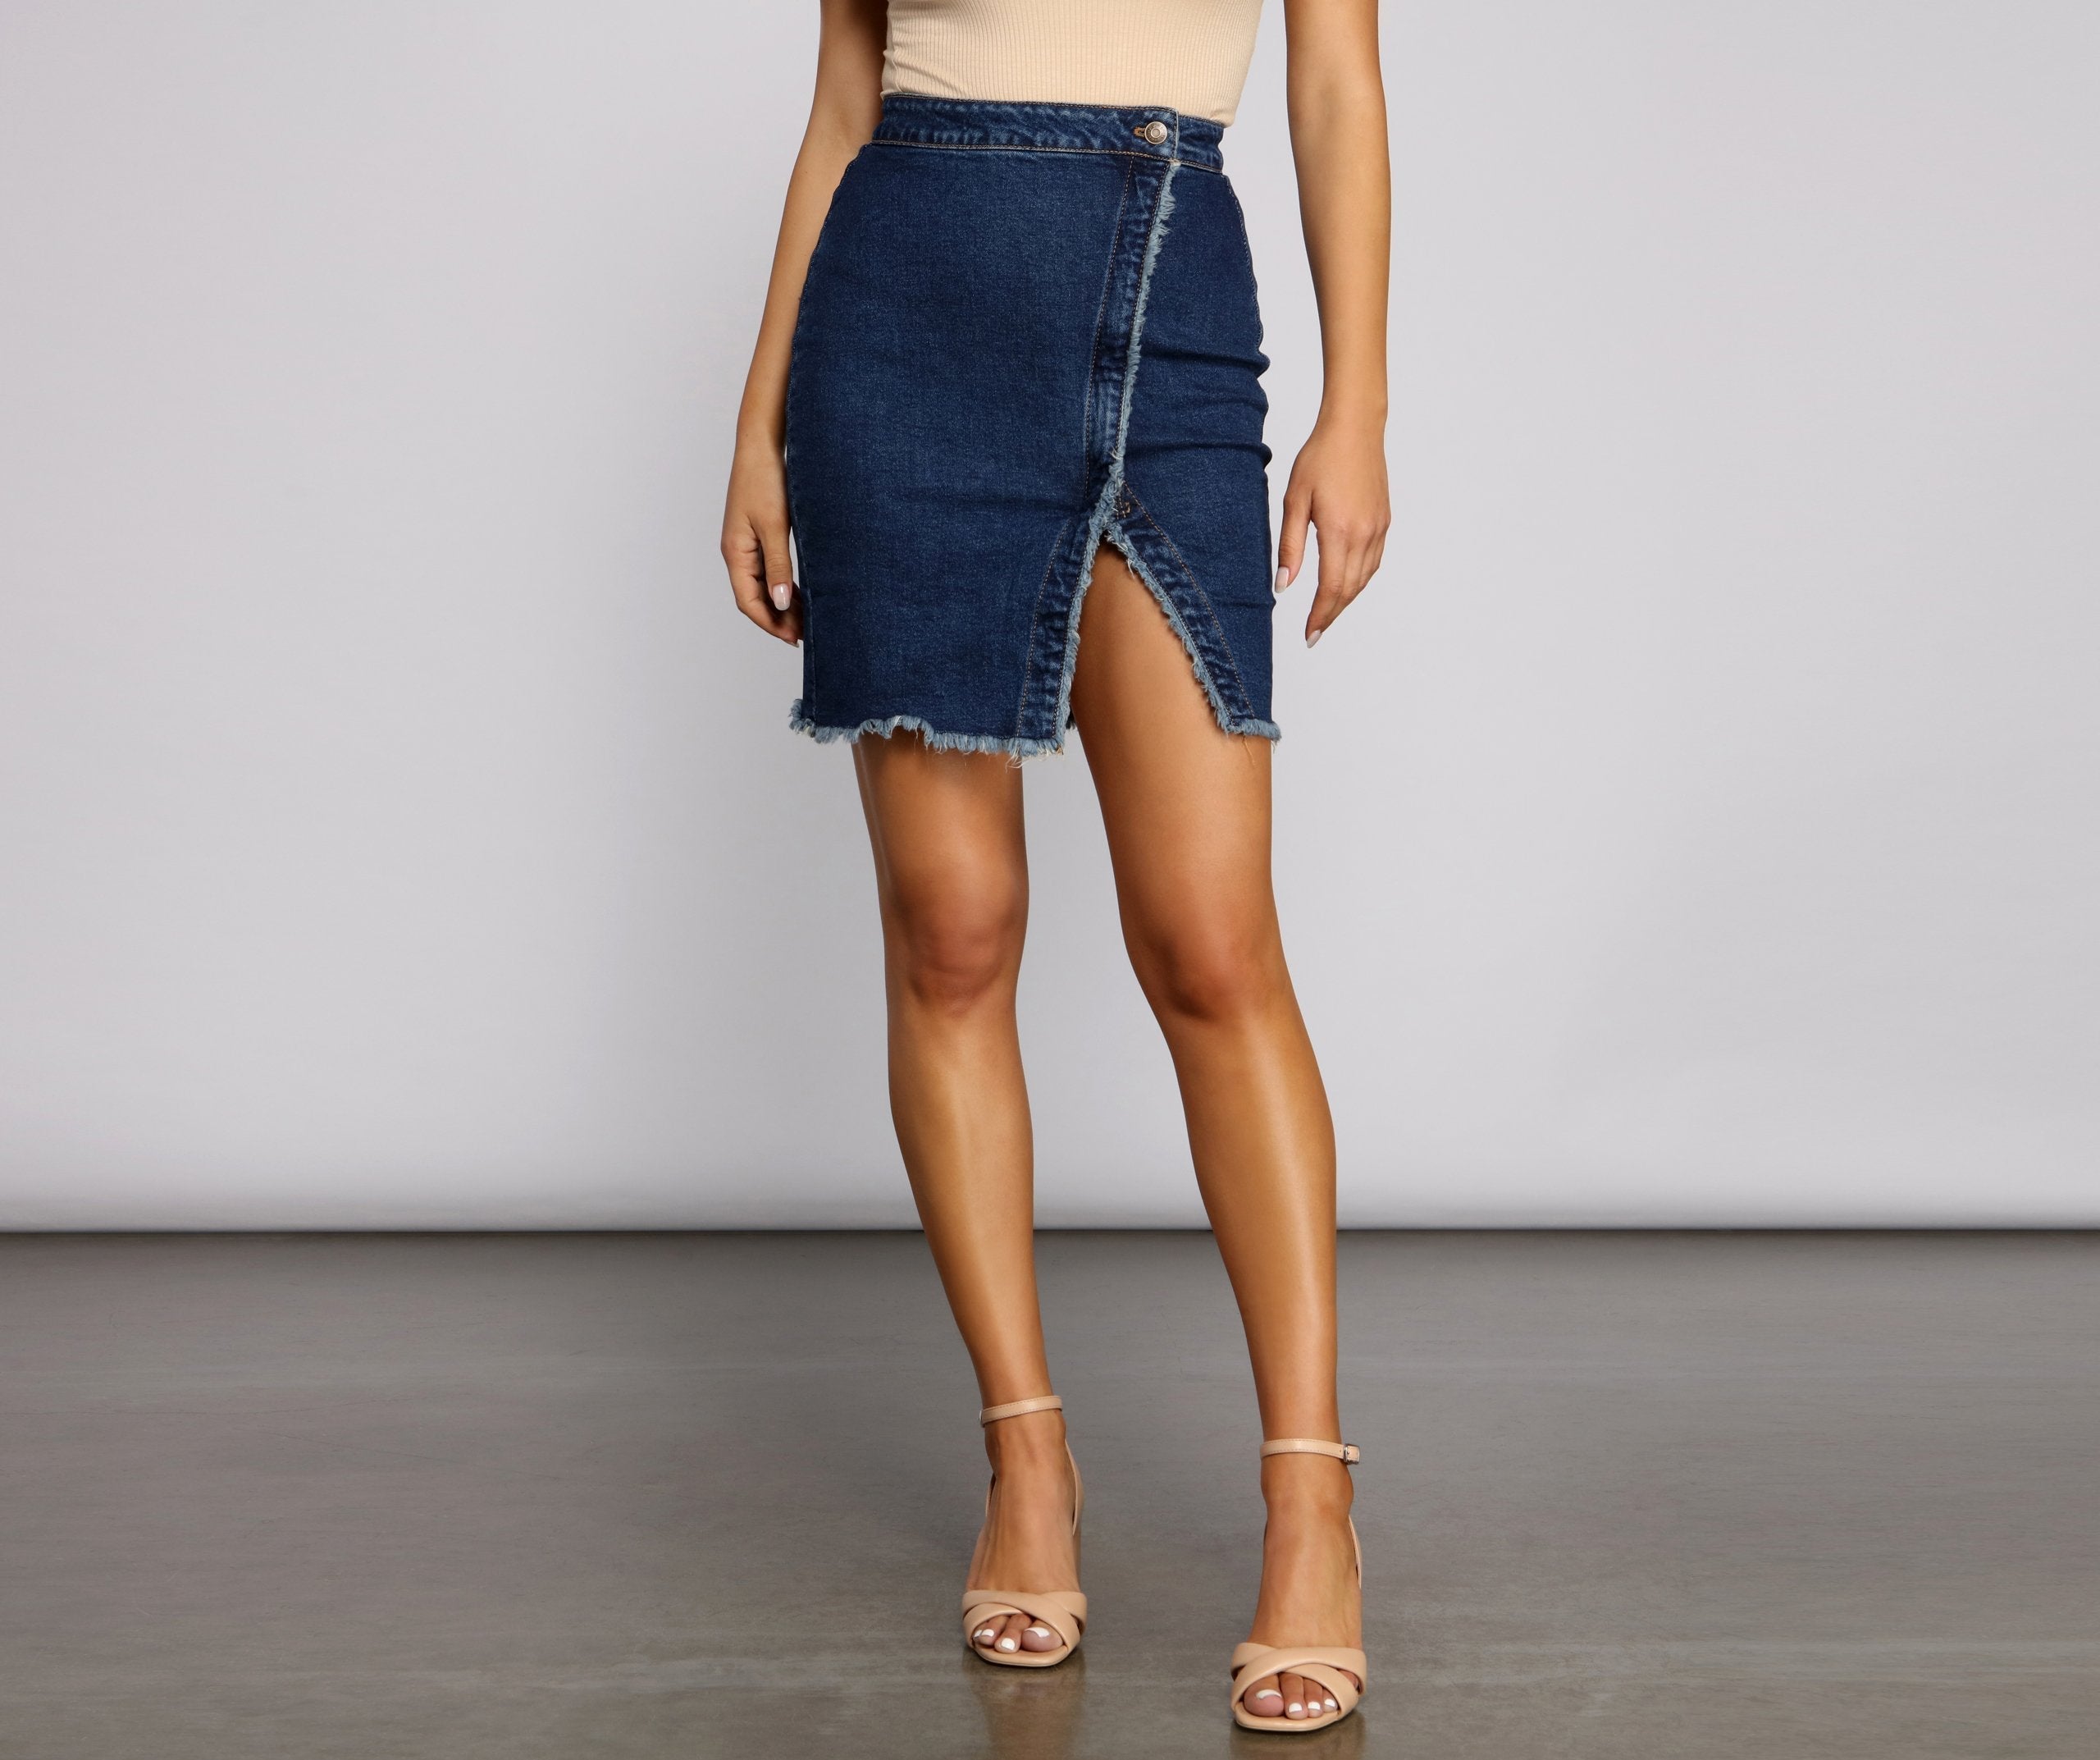 Wrapped In Styled Frayed Denim Skirt Sai Feel